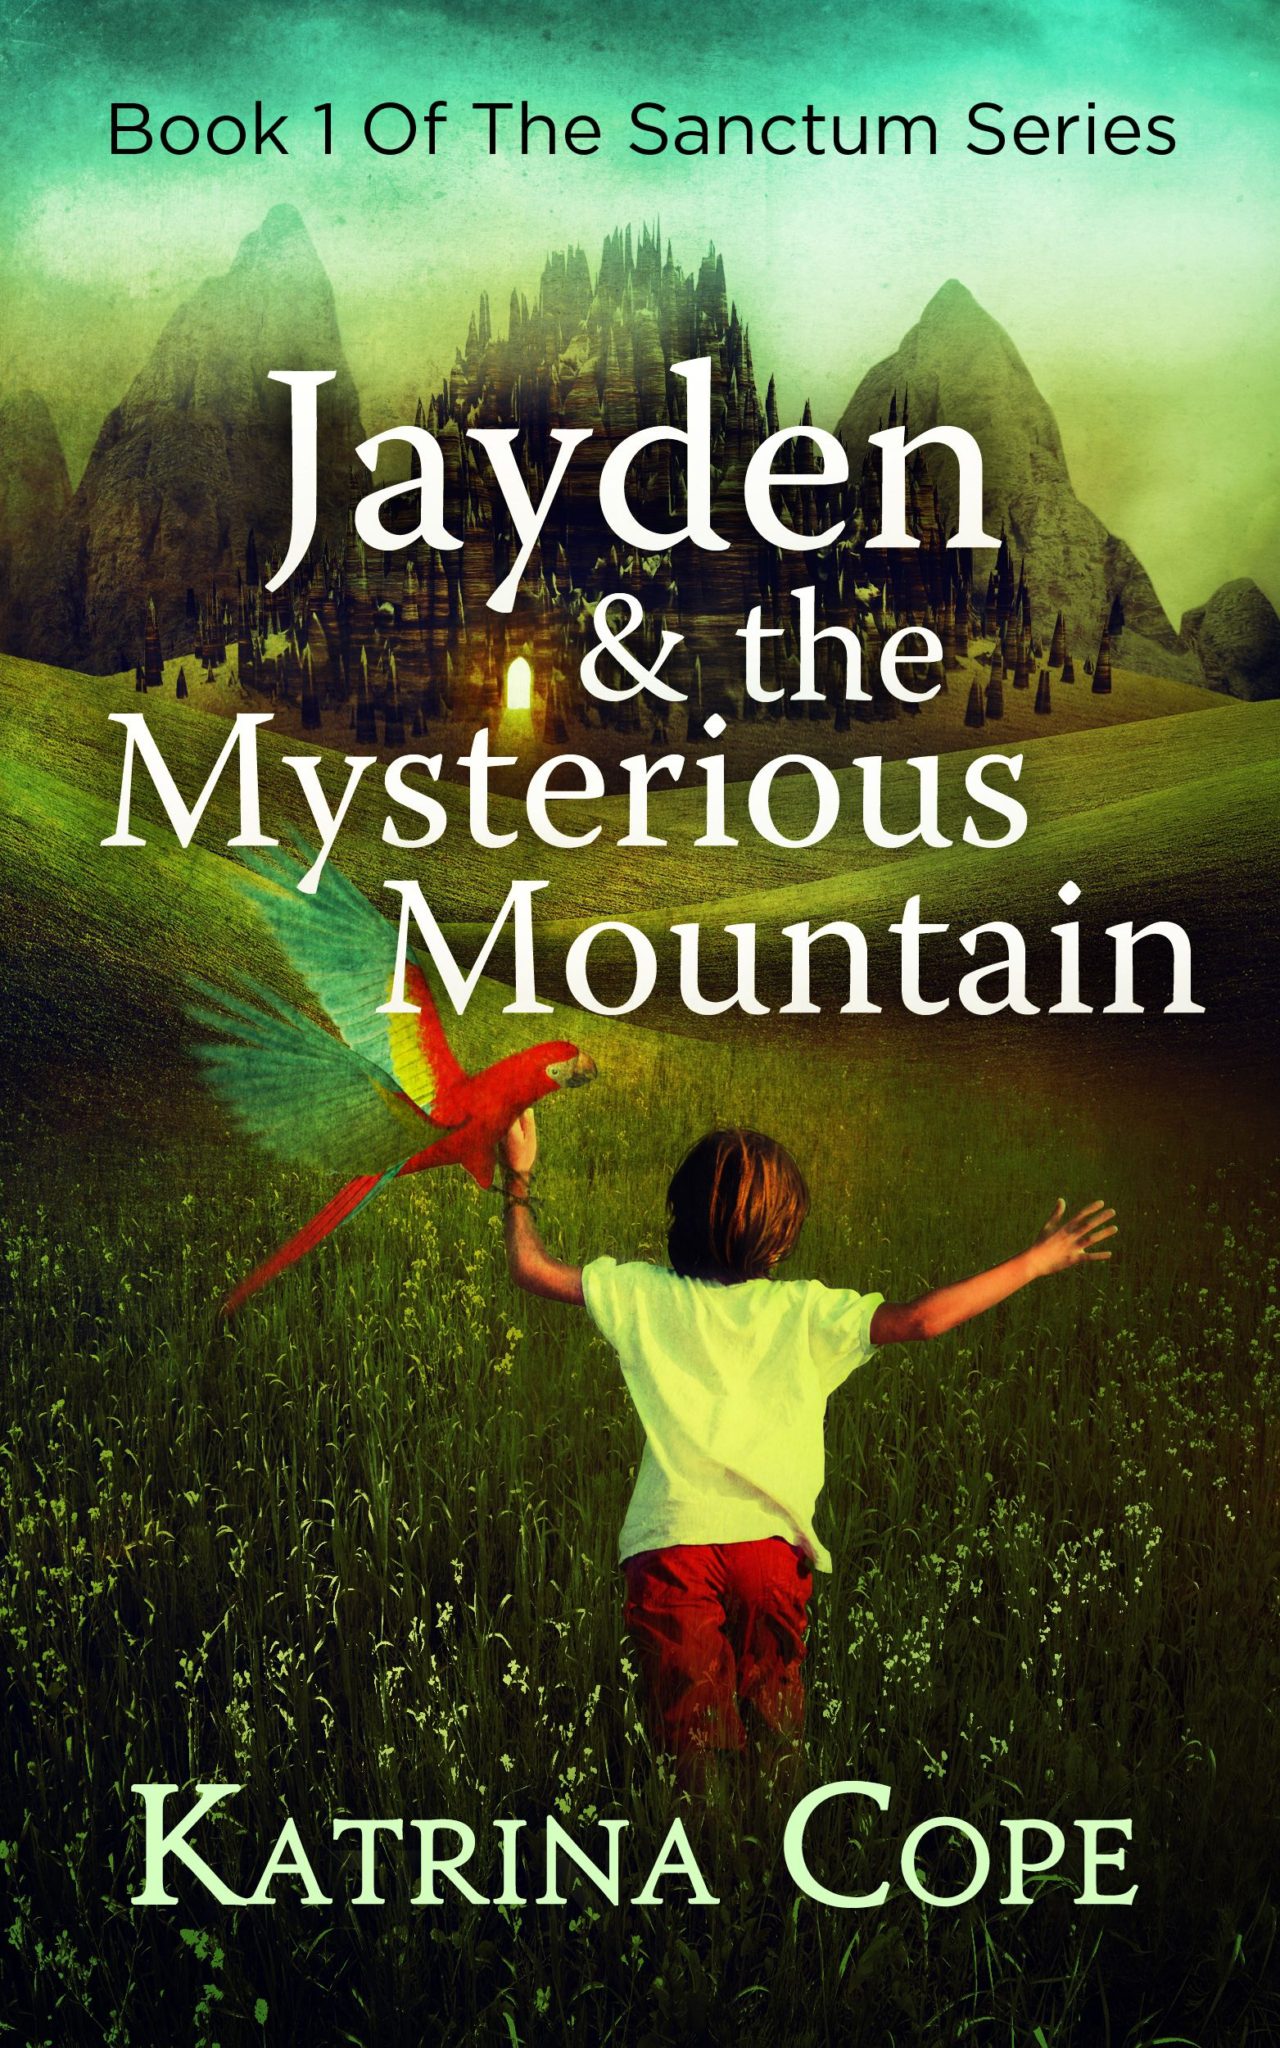 Jayden & the Mysterious Mountain: Book 1 (The Sanctum Series) by Katrina Cope